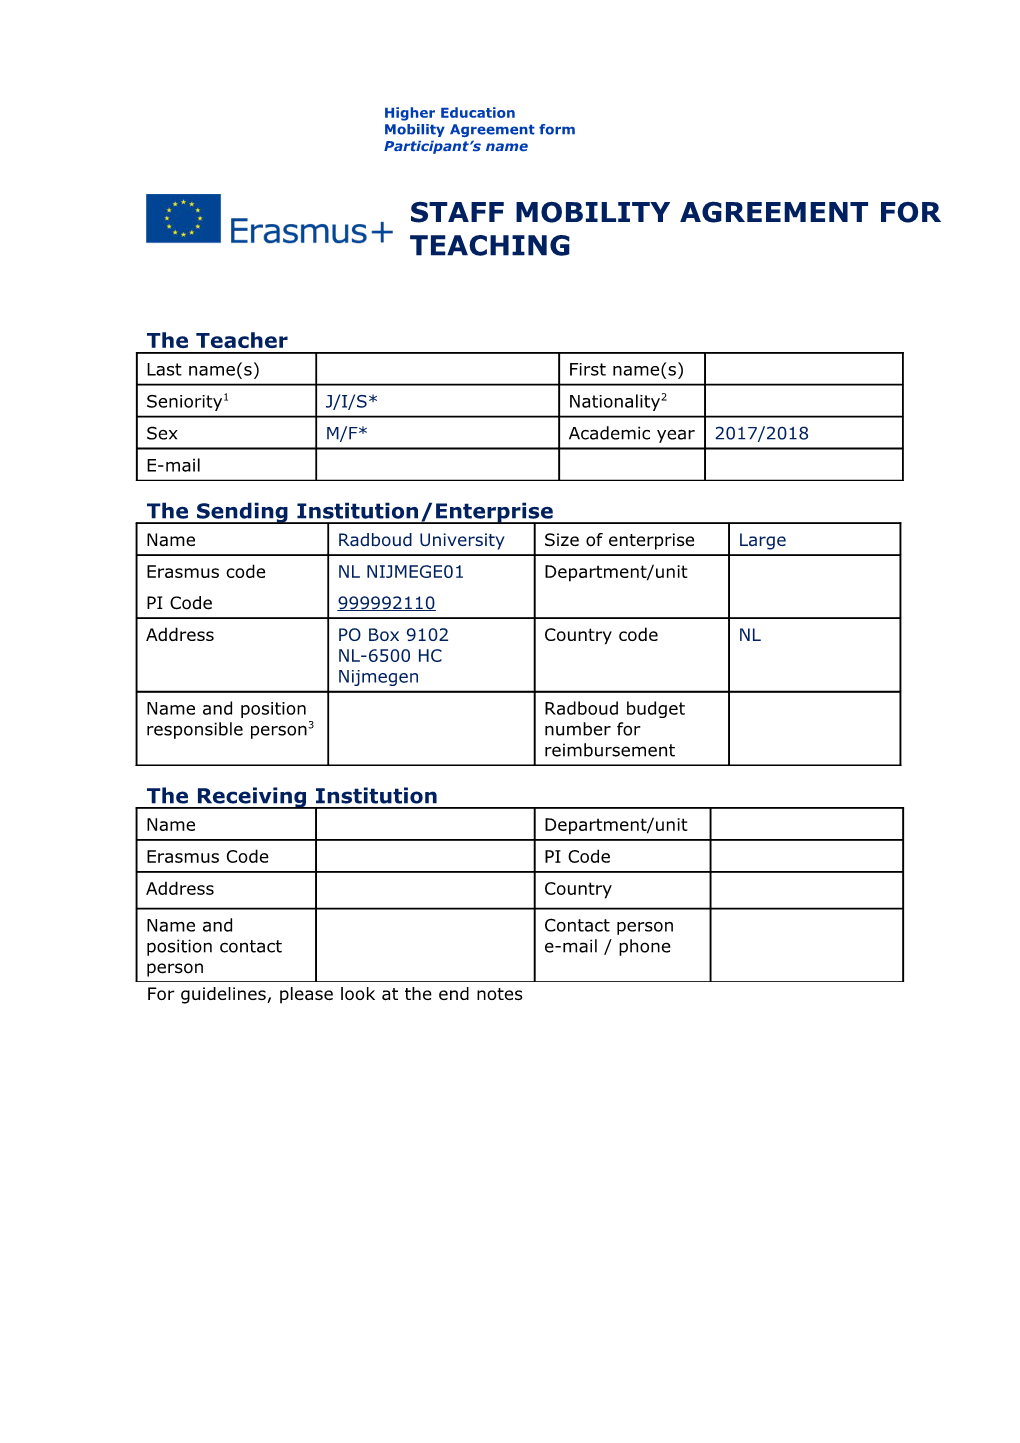 Staff Mobility for Teaching - Mobility Agreement